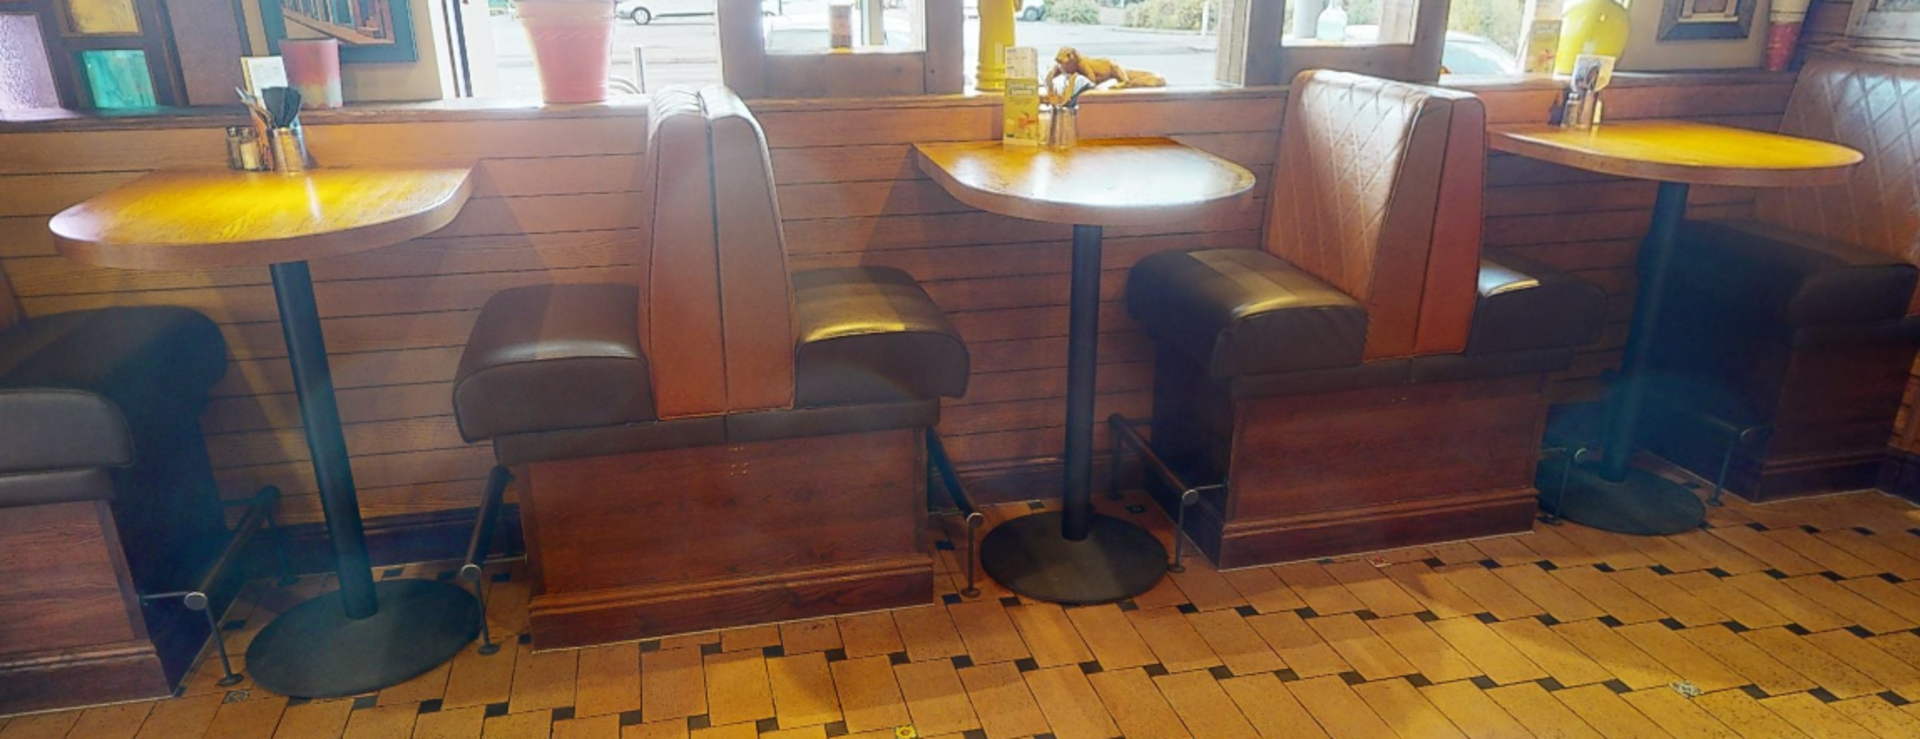 1 x Collection of Restaurant High Single Seat Seating Benches With Footrests - Includes 2 x End - Image 11 of 16